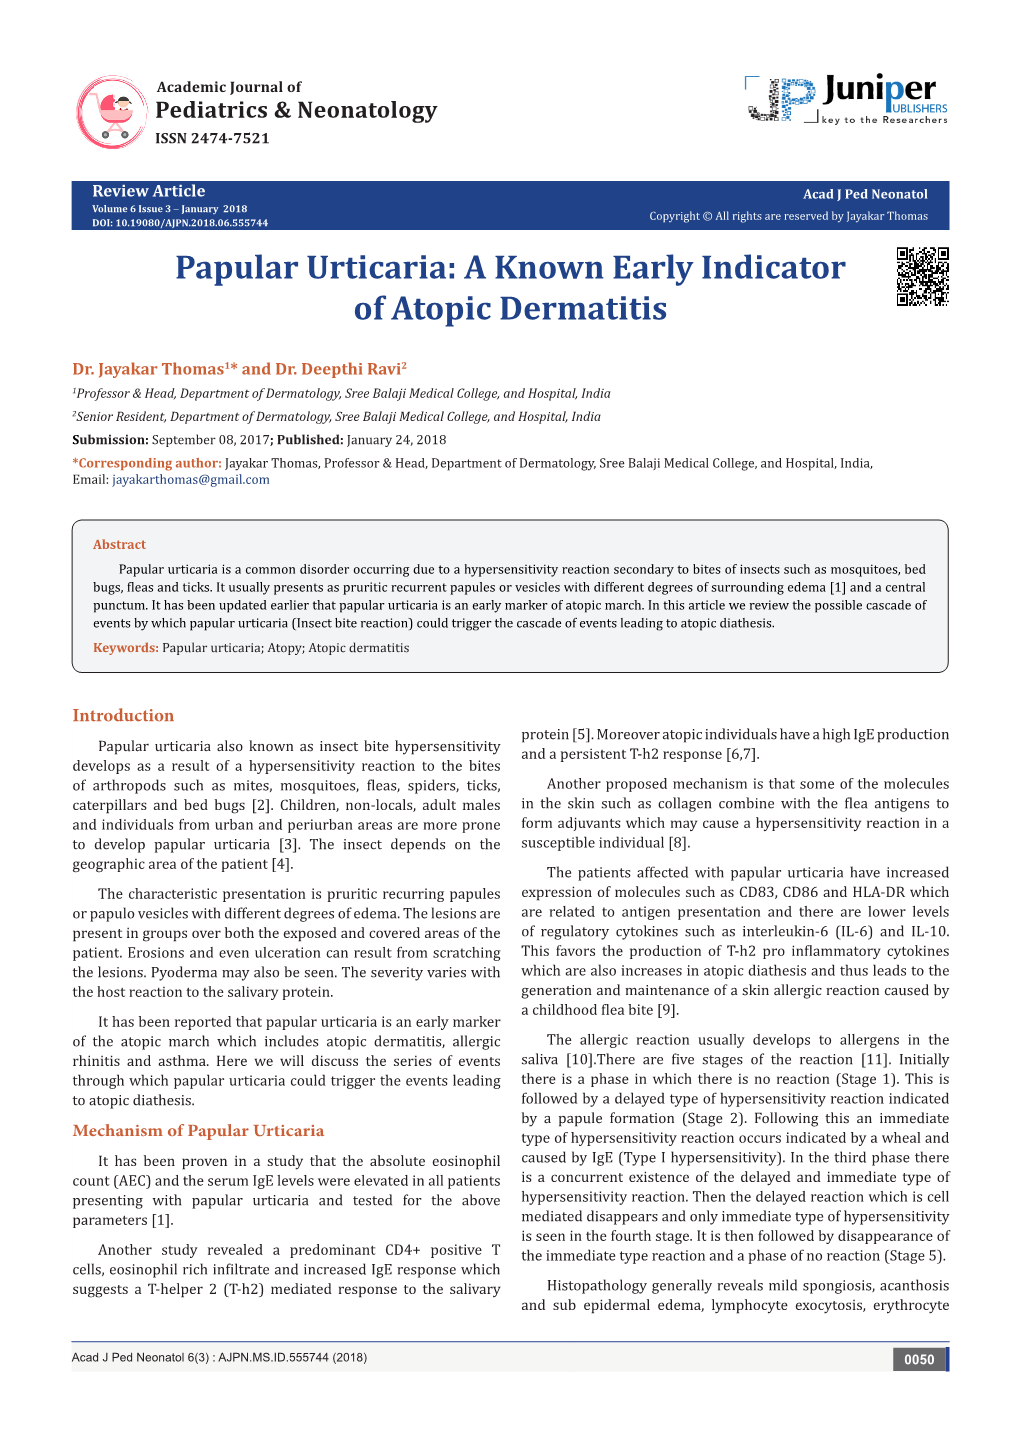 Papular Urticaria: a Known Early Indicator of Atopic Dermatitis